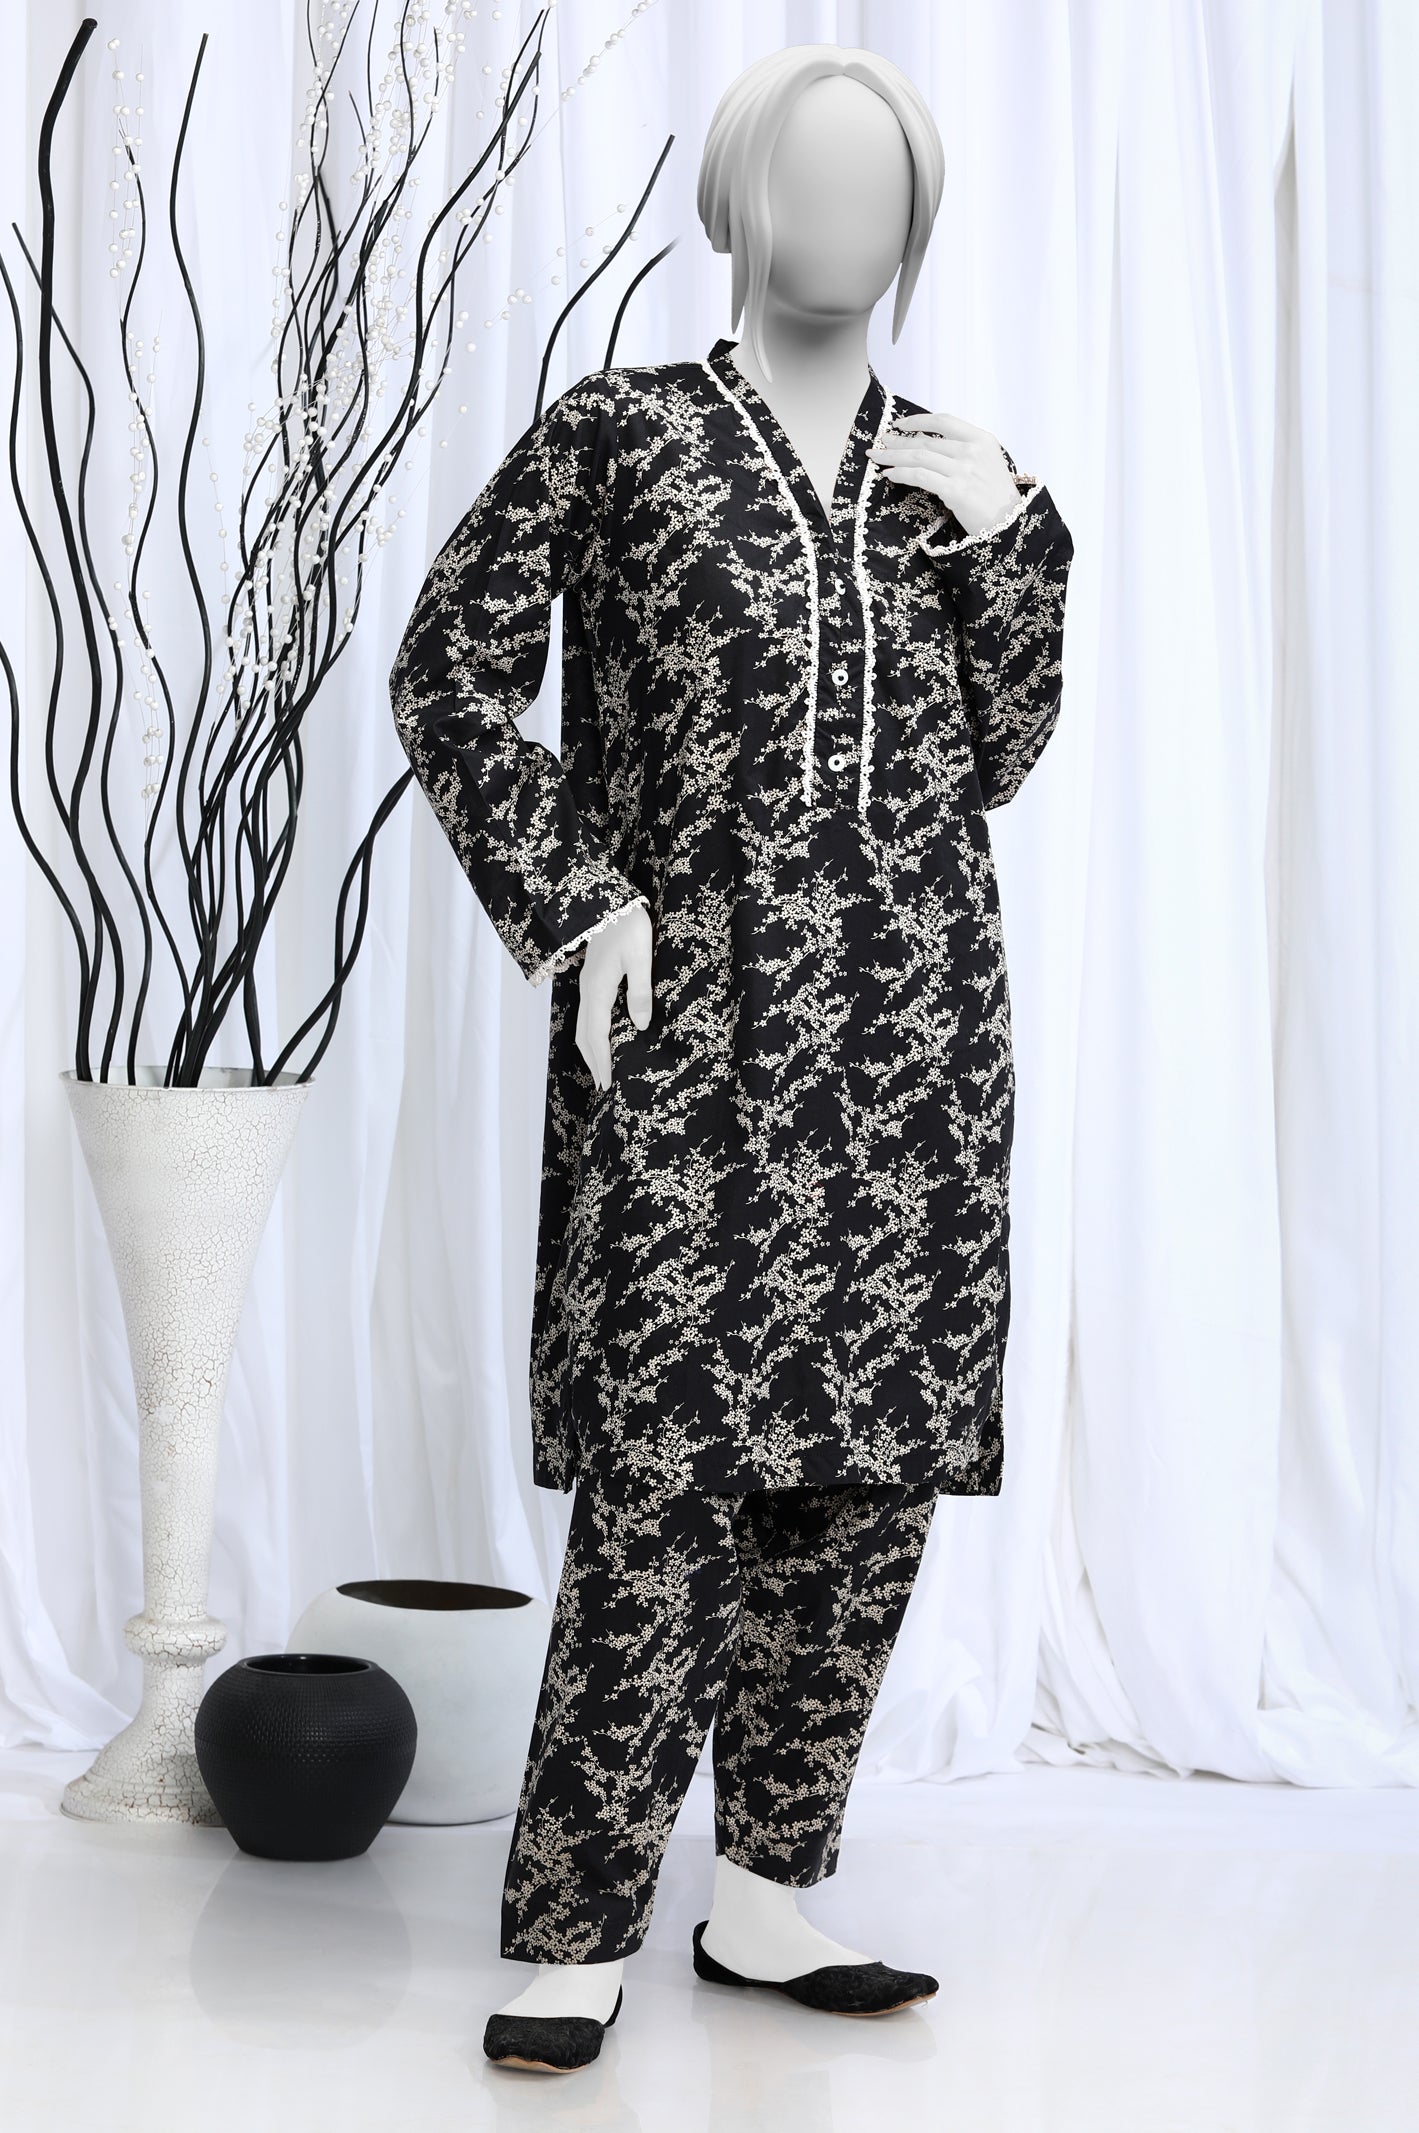 2PC Cambric Printed Black Suit From Diners